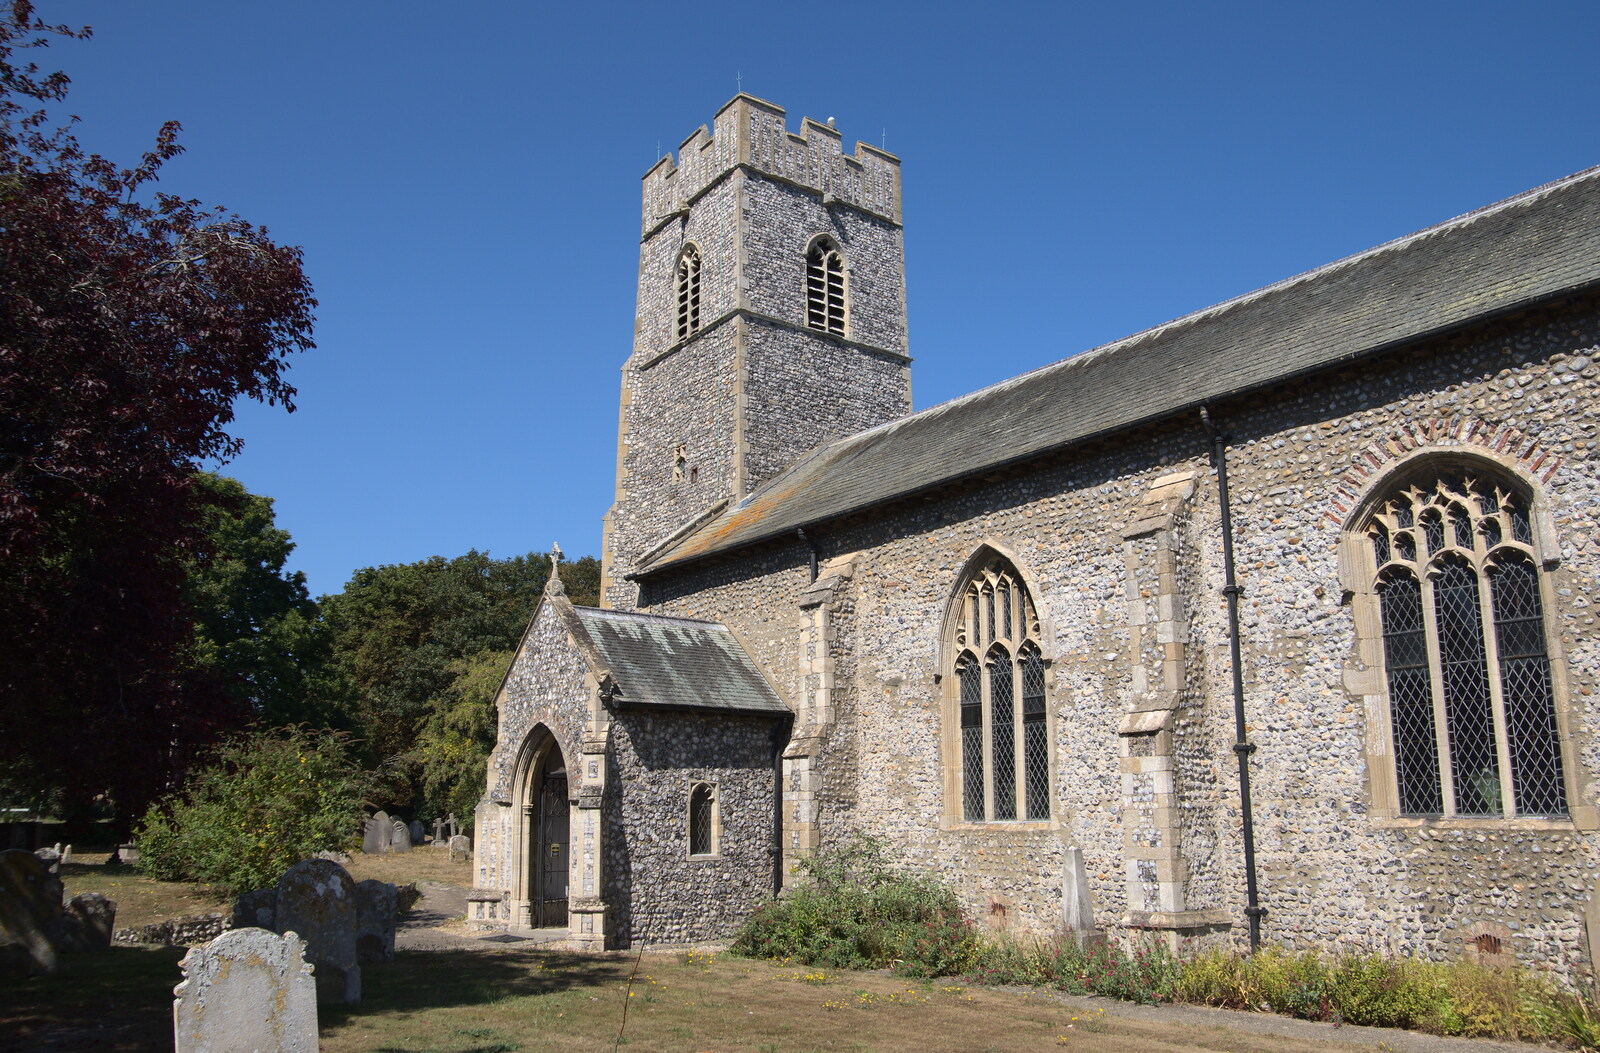 St. Martin's church at Overstrand from Camping at Forest Park, Cromer, Norfolk - 12th August 2022